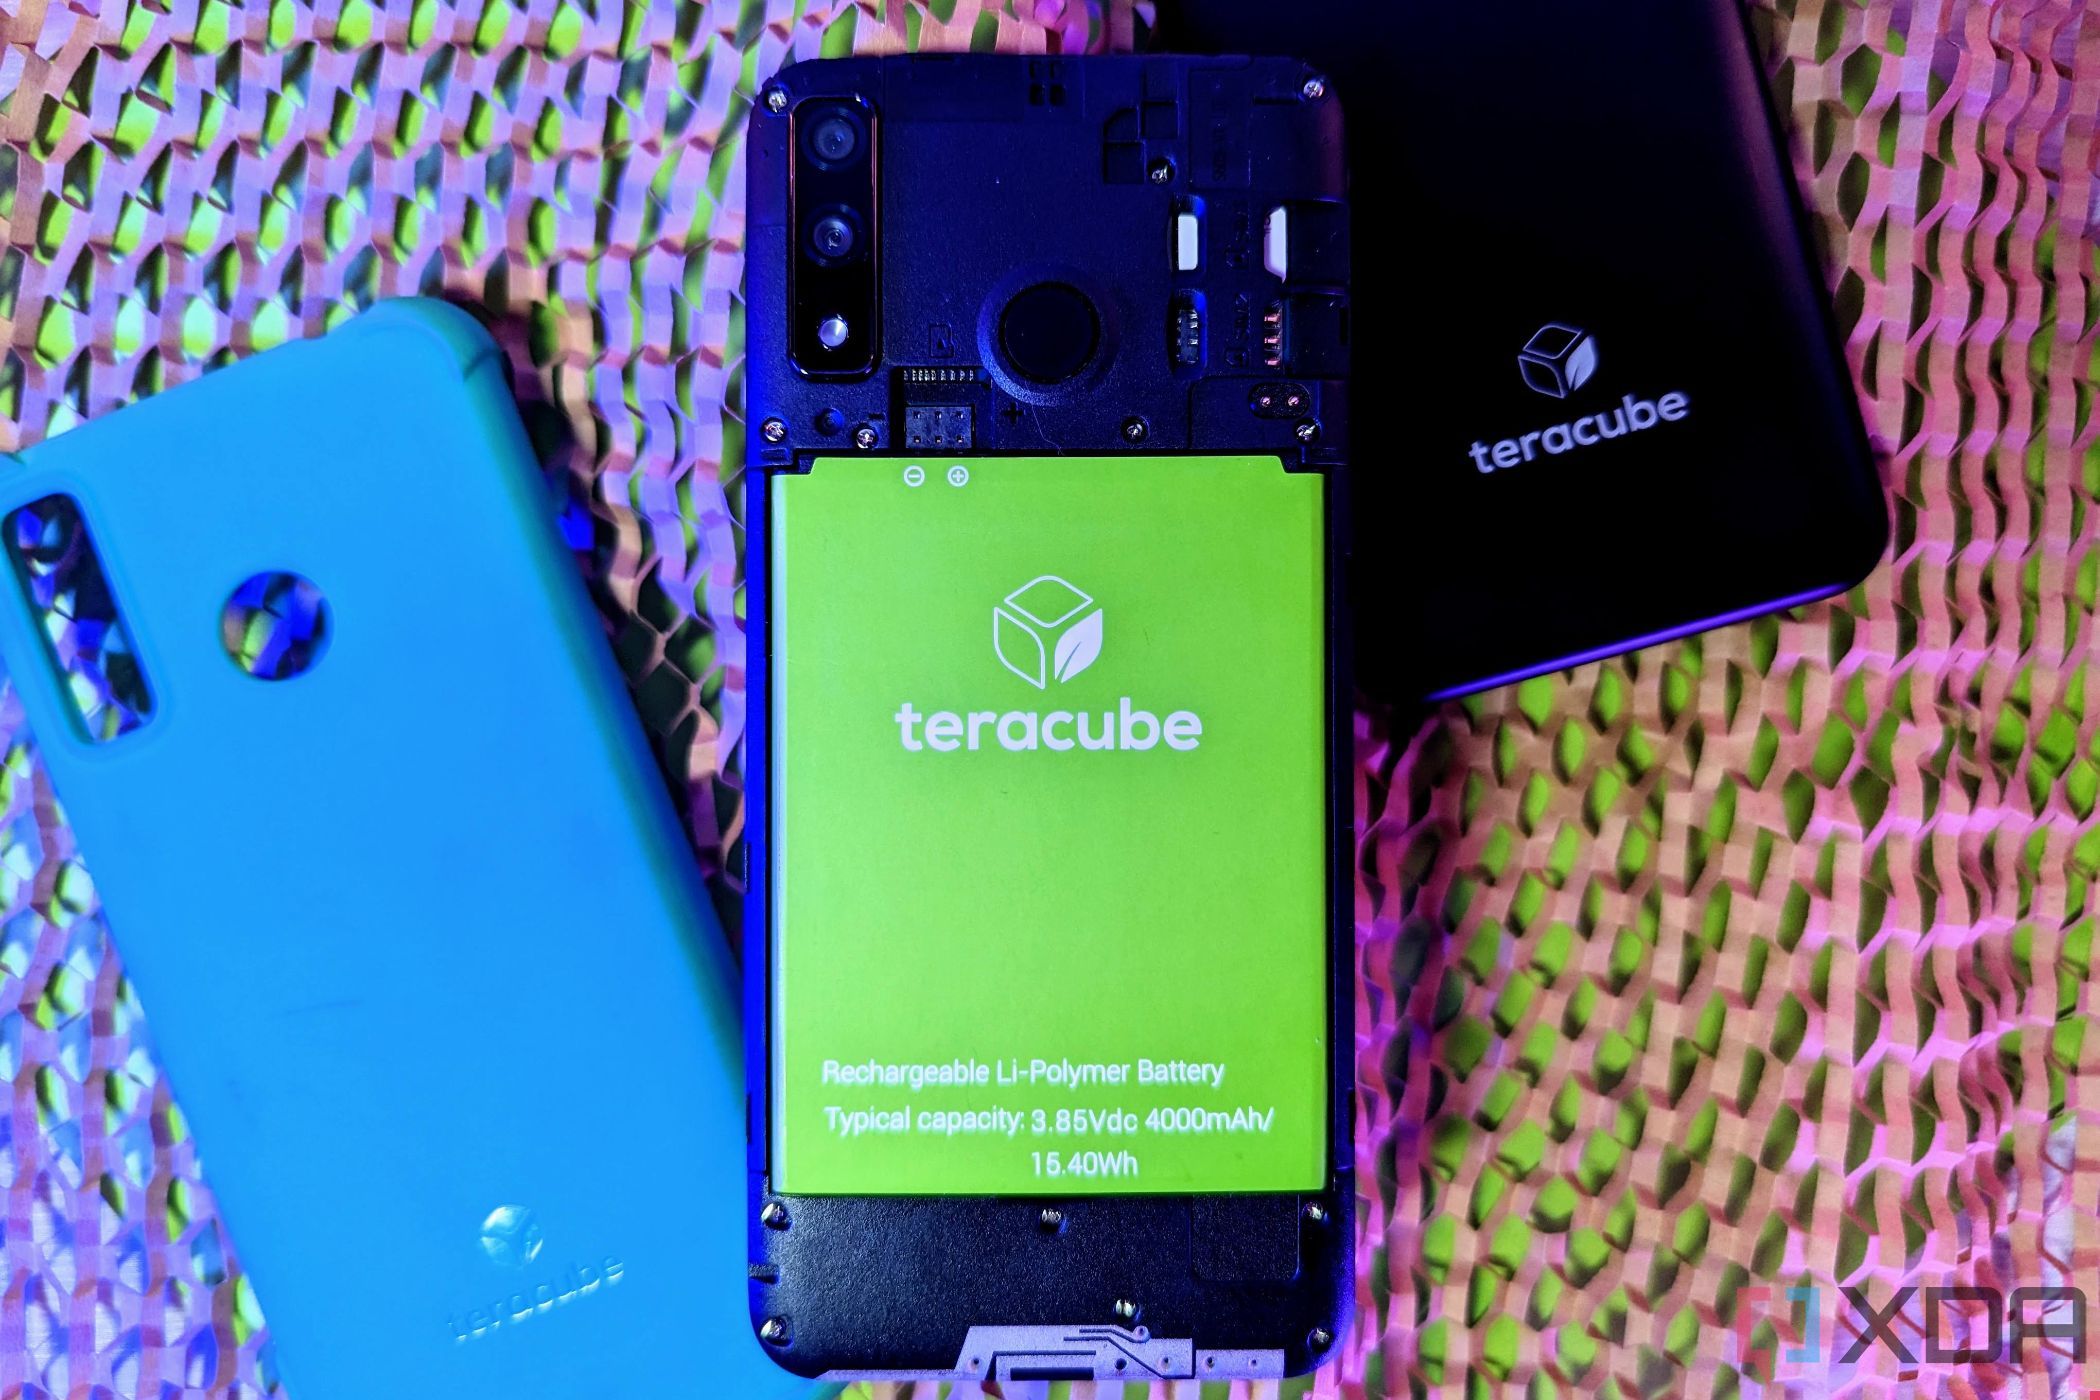 Teracube Thrive back panel removed showing the battery